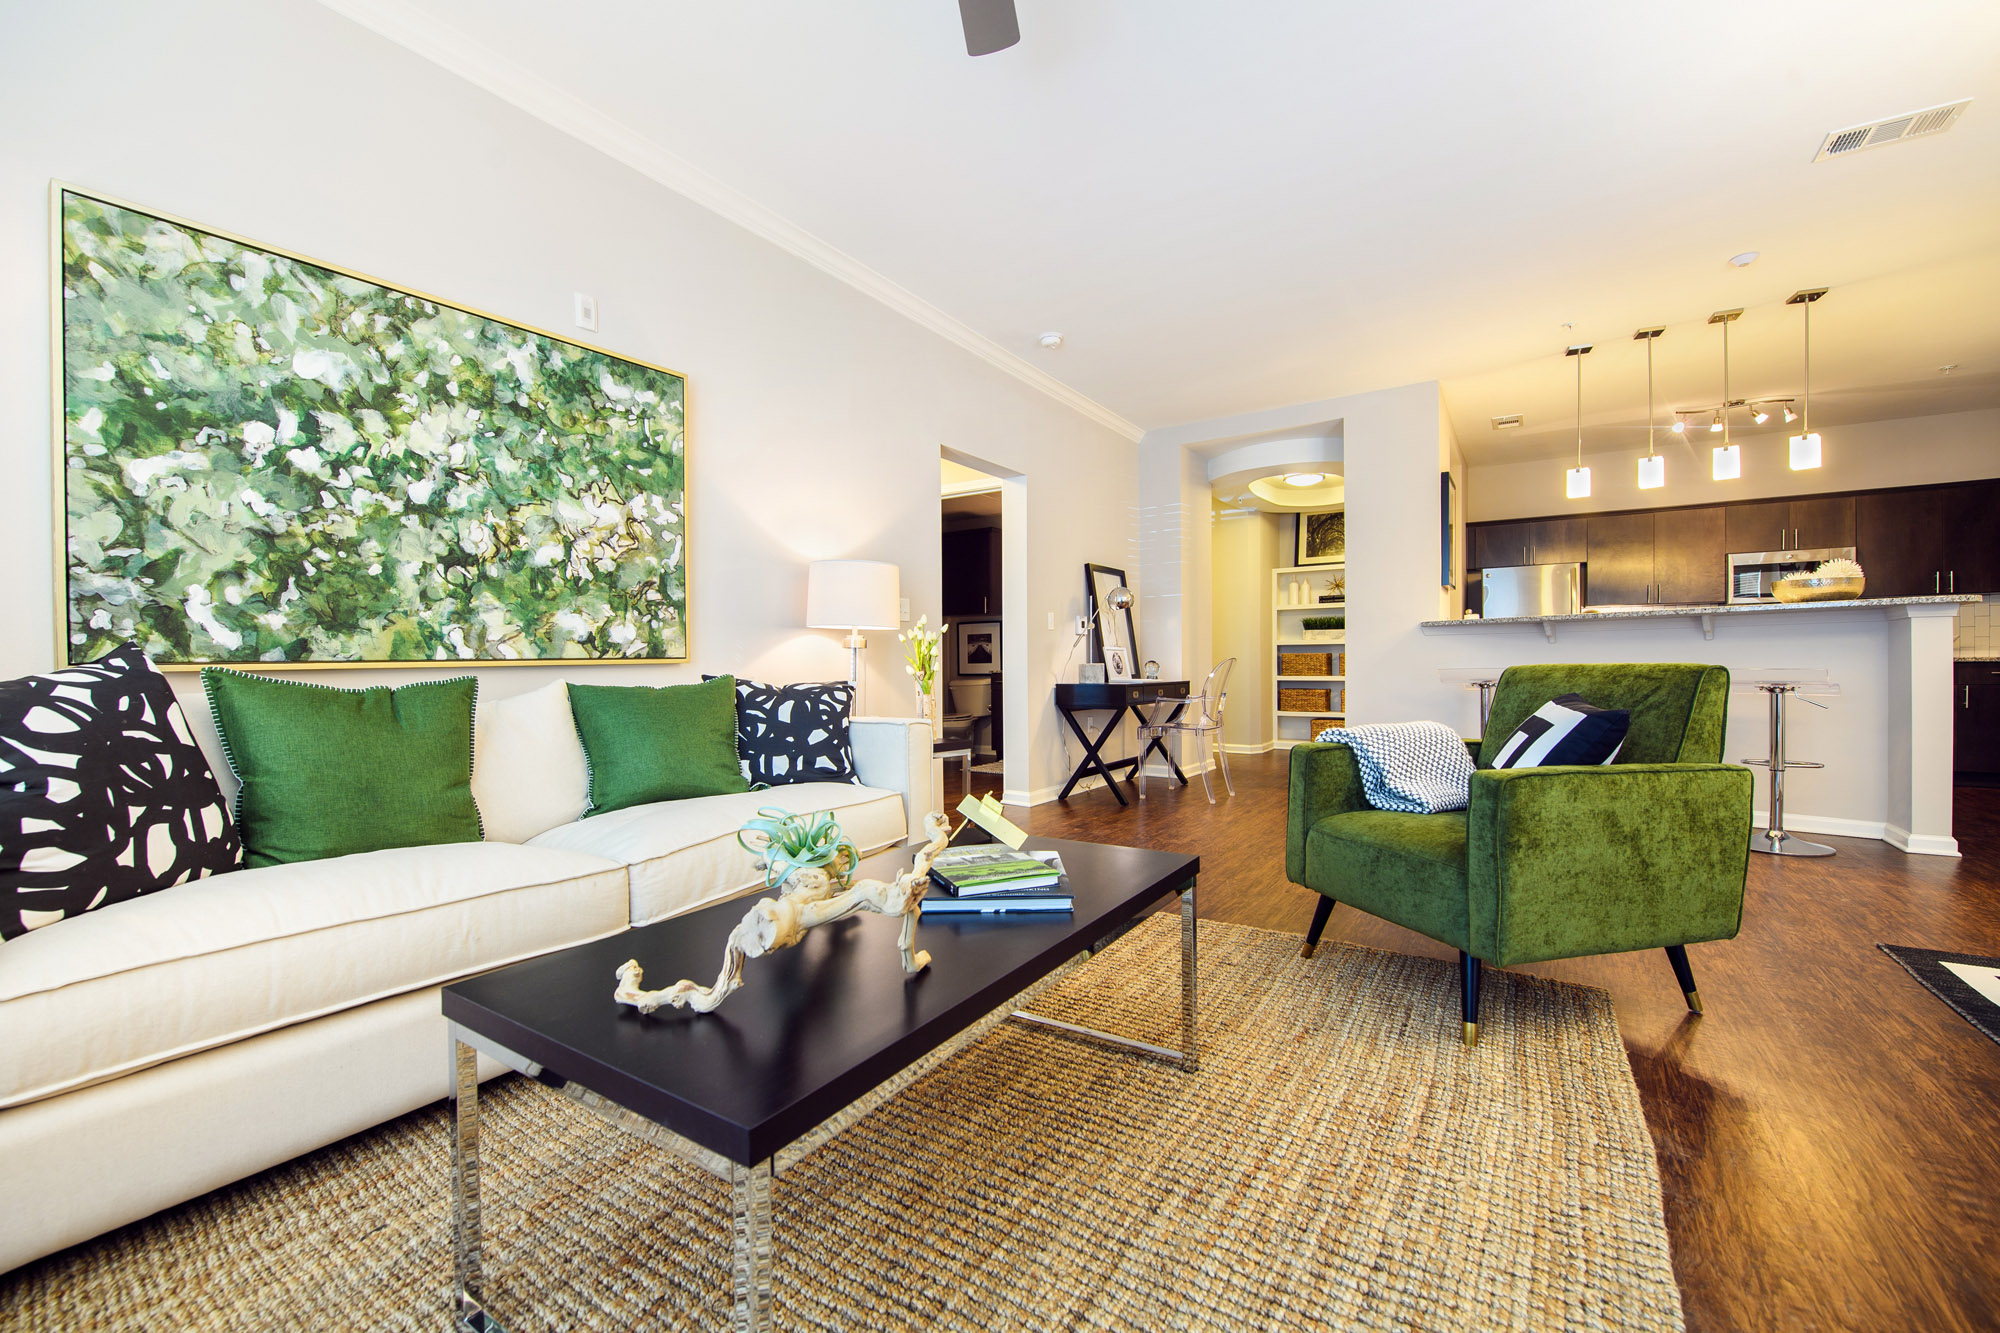 Green and Black accent decor in apartment living space